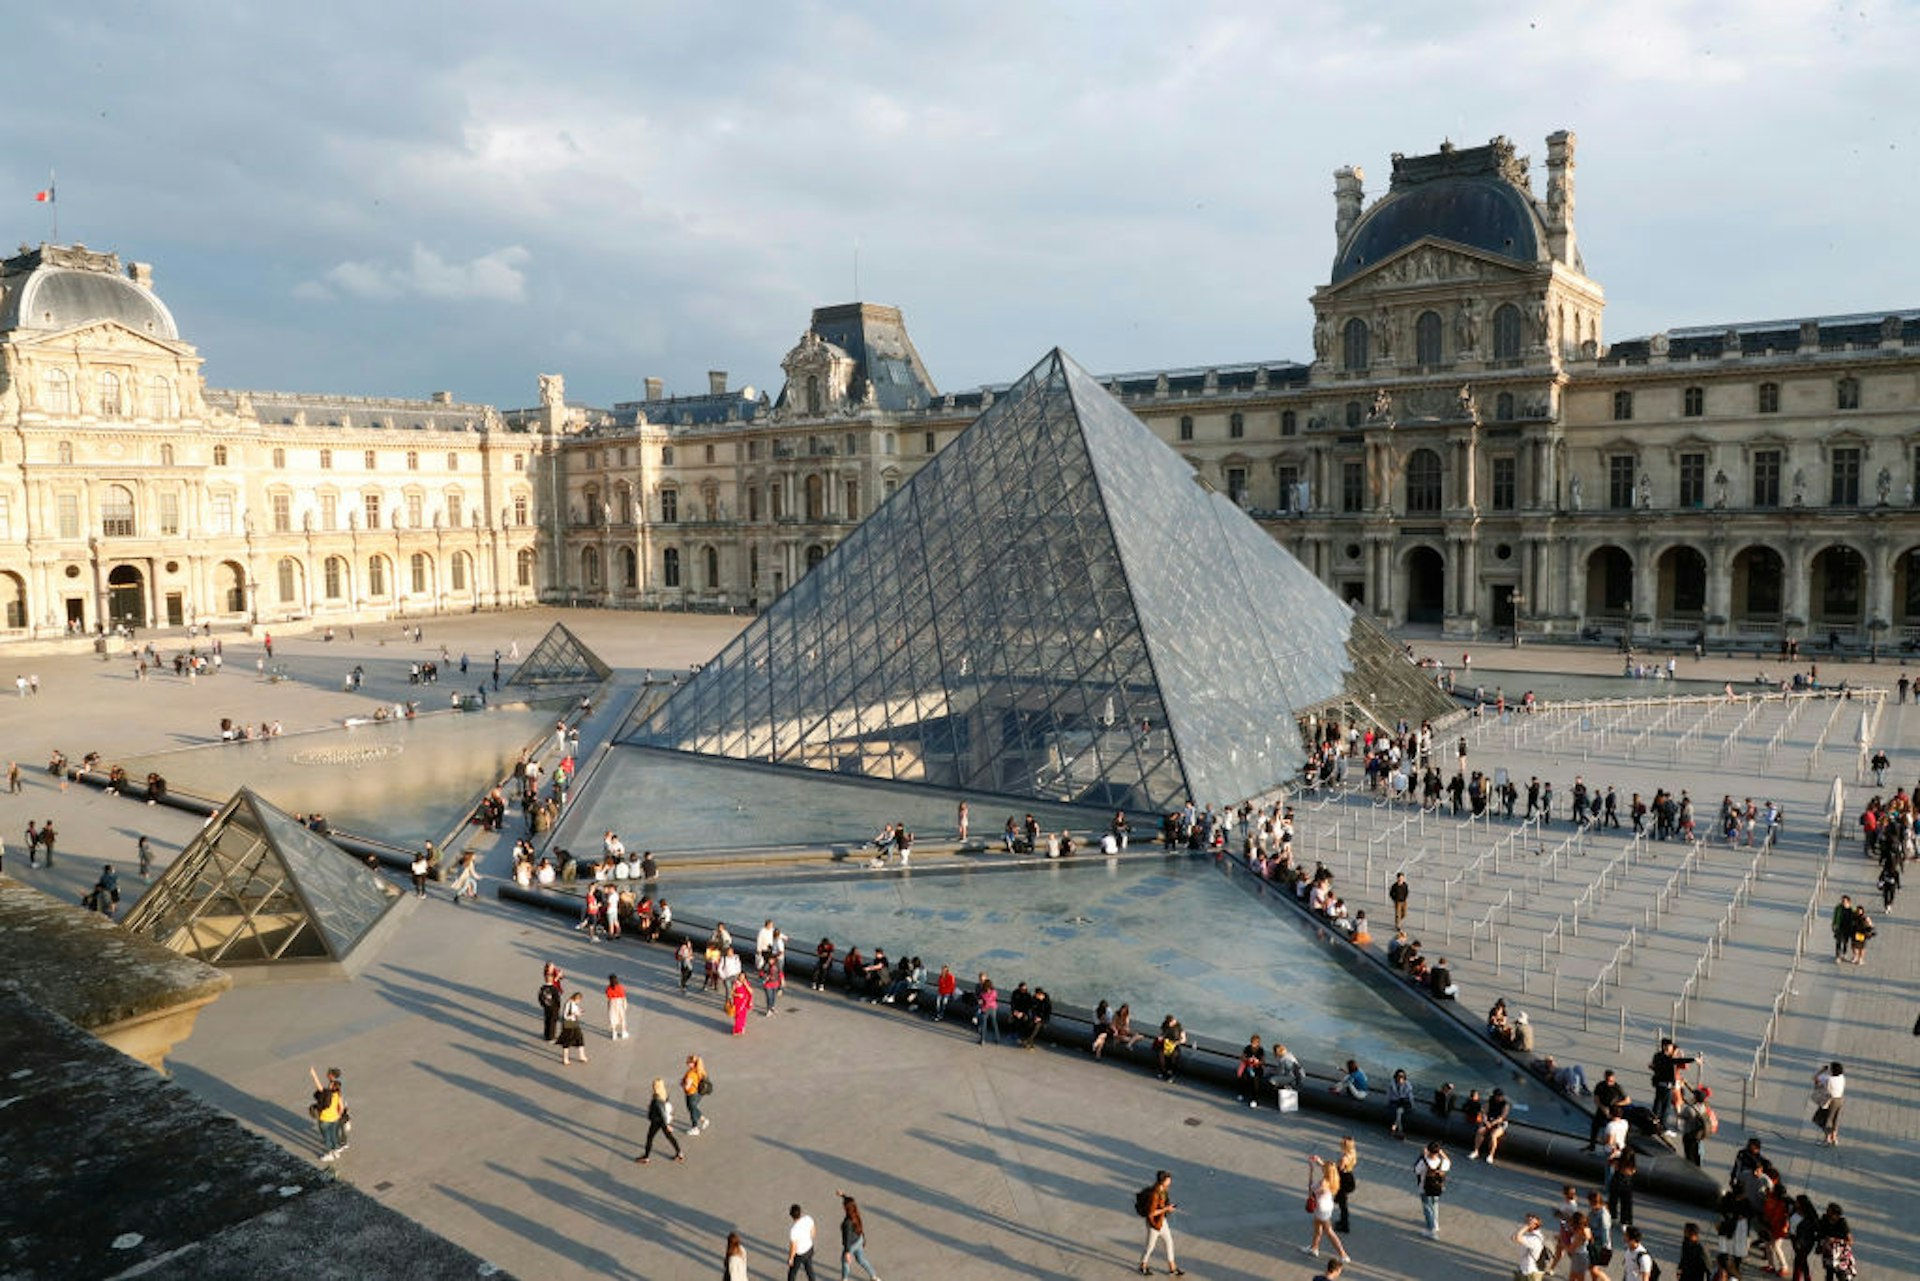 External view of the Louvre and its featured glass pyramid